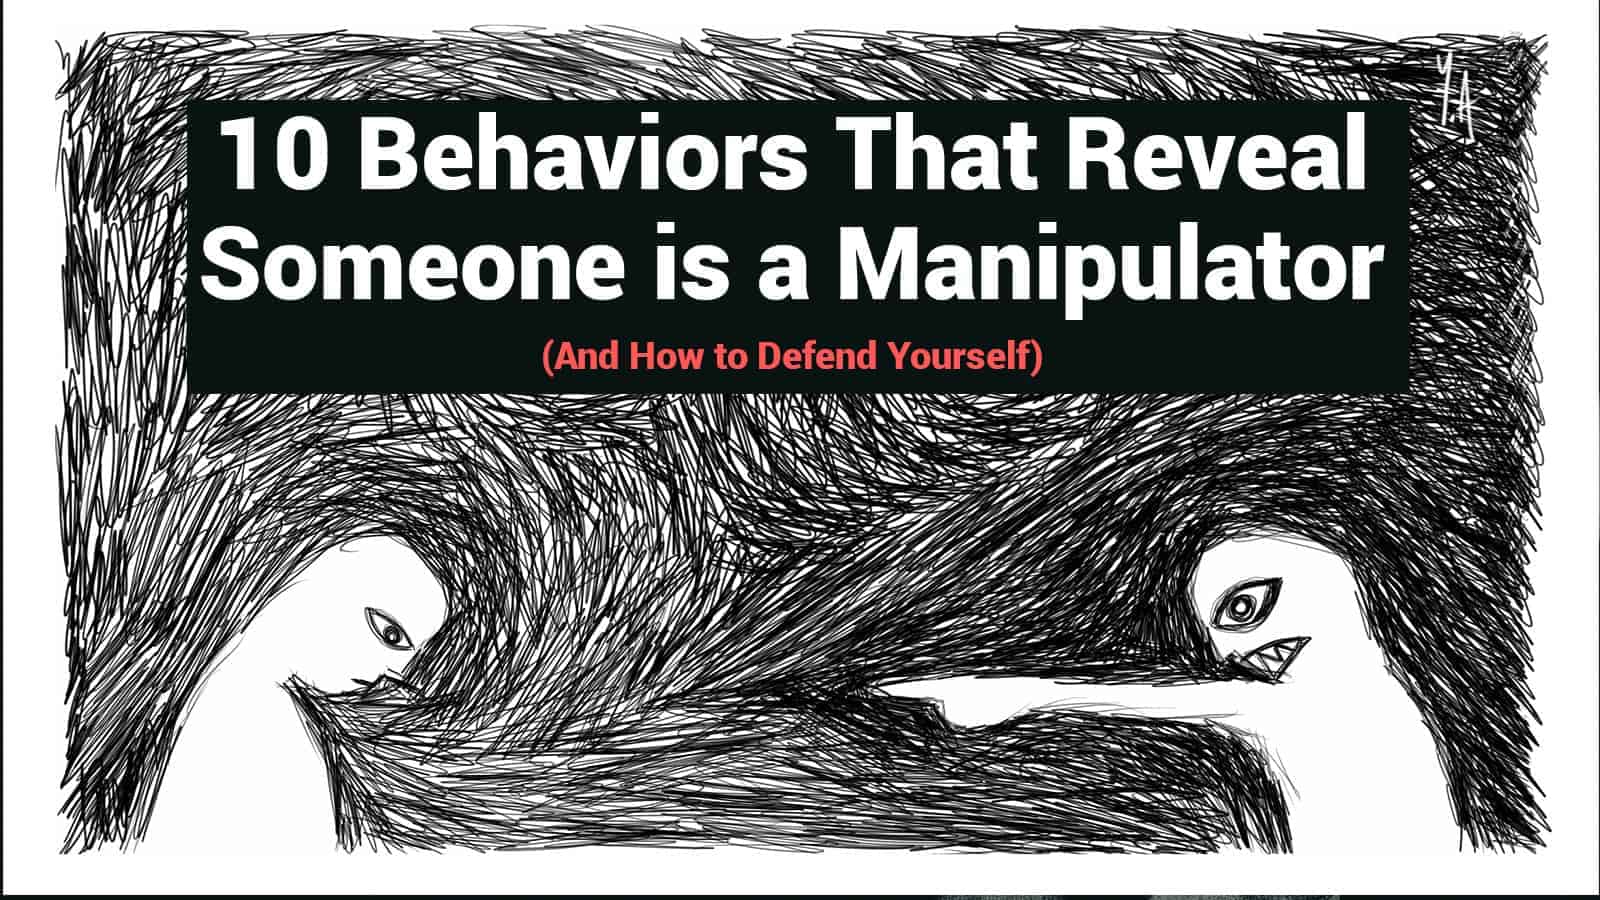 10 Behaviors That Reveal Someone is a Manipulator (And How to Defend Yourself)